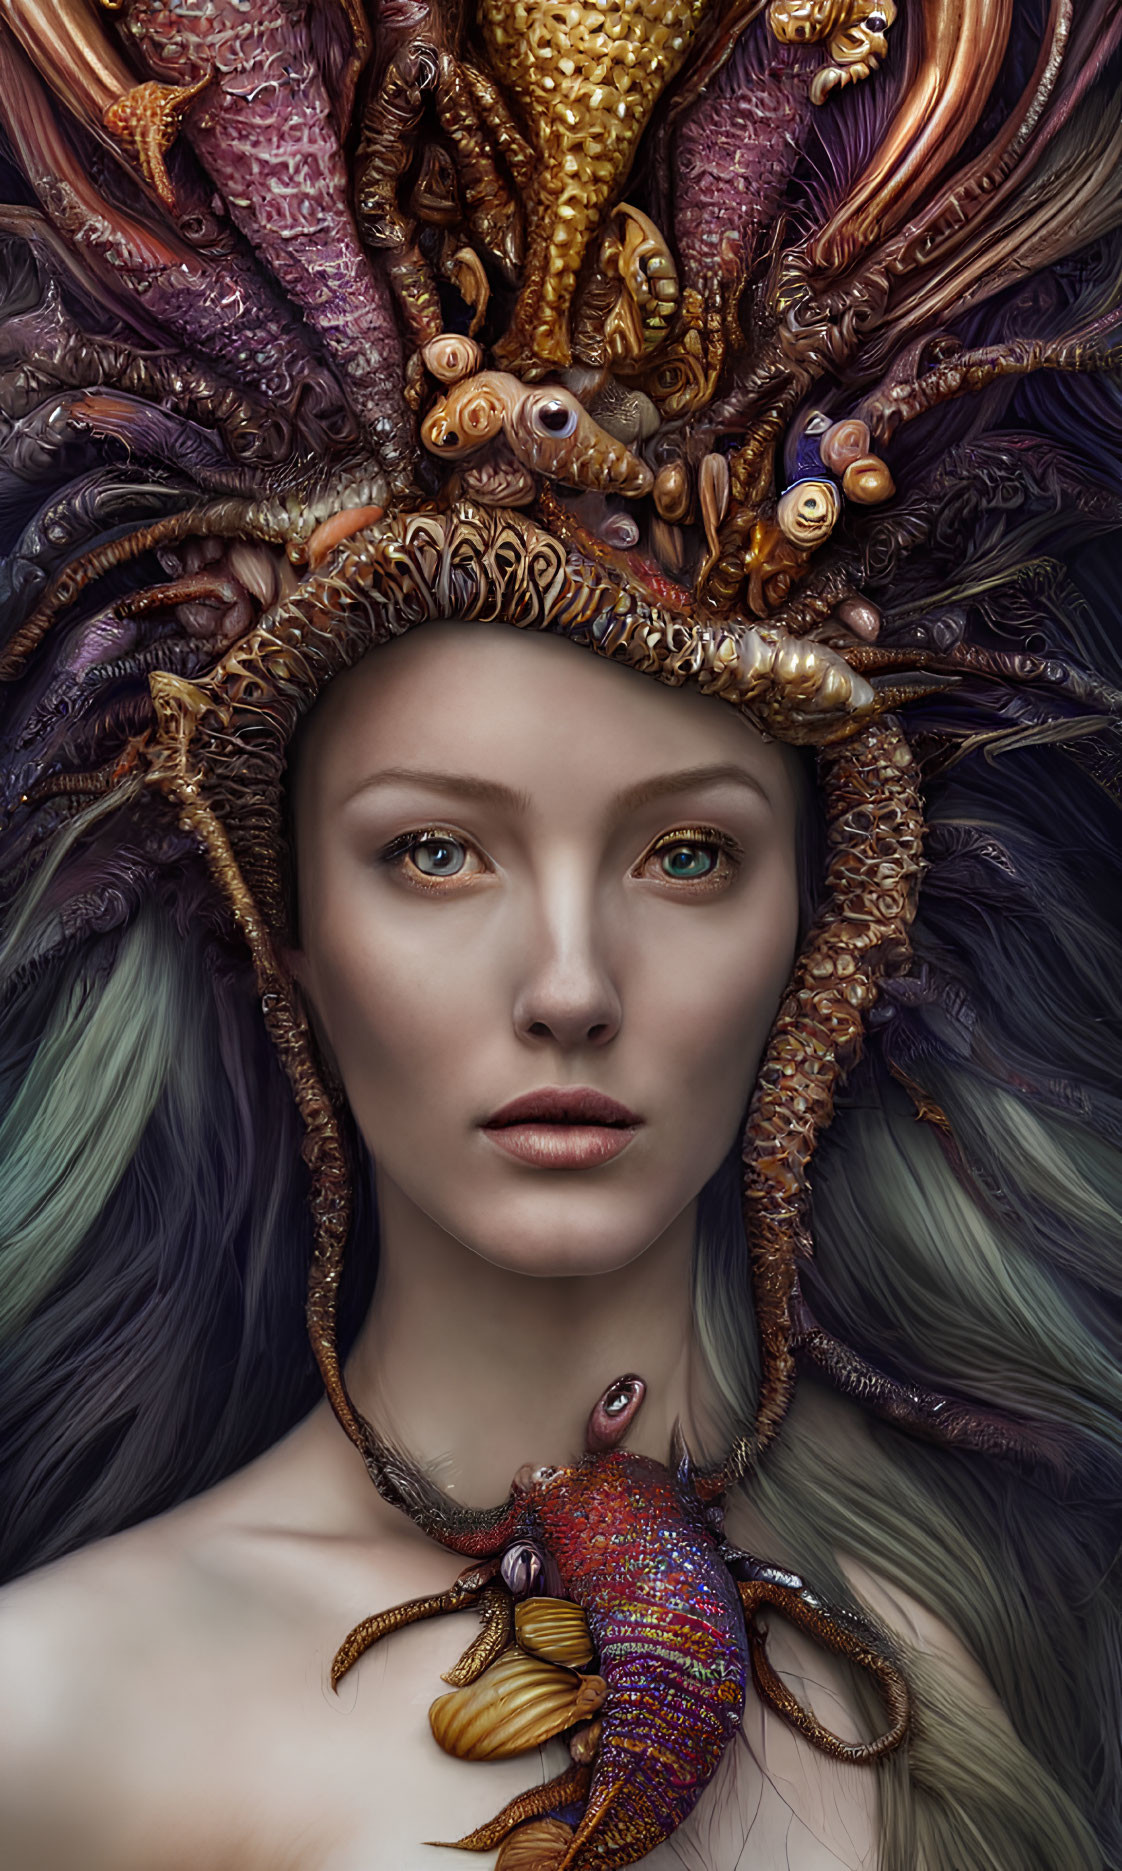 Elaborate headdress with octopus and sea life, blue-eyed woman with small sea creature on